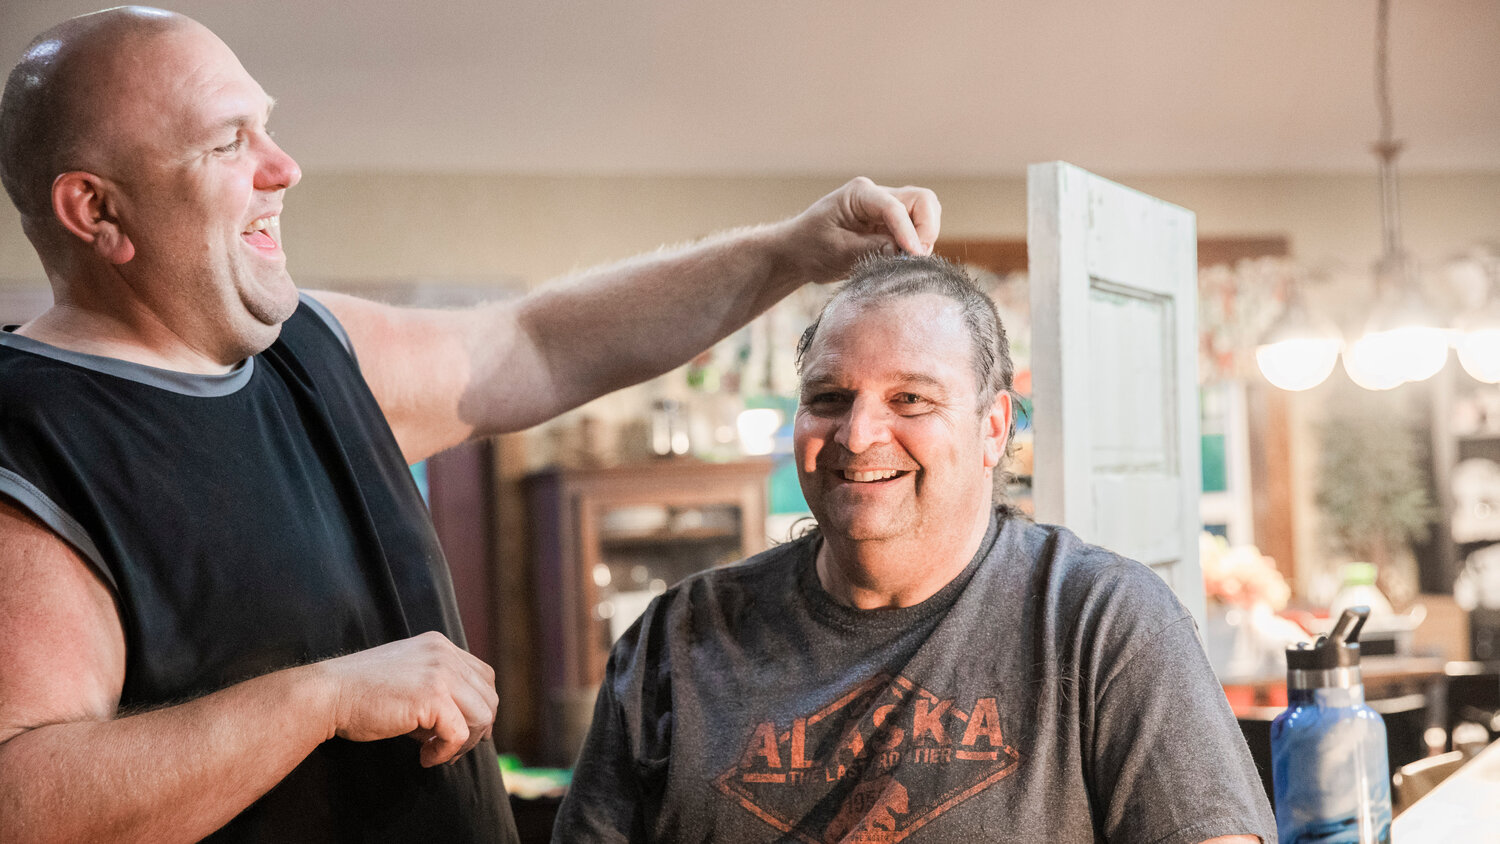 Ty Vlach smiles as he cuts Ken Wiseman’s hair to raise awareness for his sister Tonja Vlach, a receptionist at I-5 Toyota, who is undergoing chemotherapy for breast cancer and an auction the family is holding online to raise funds this weekend.